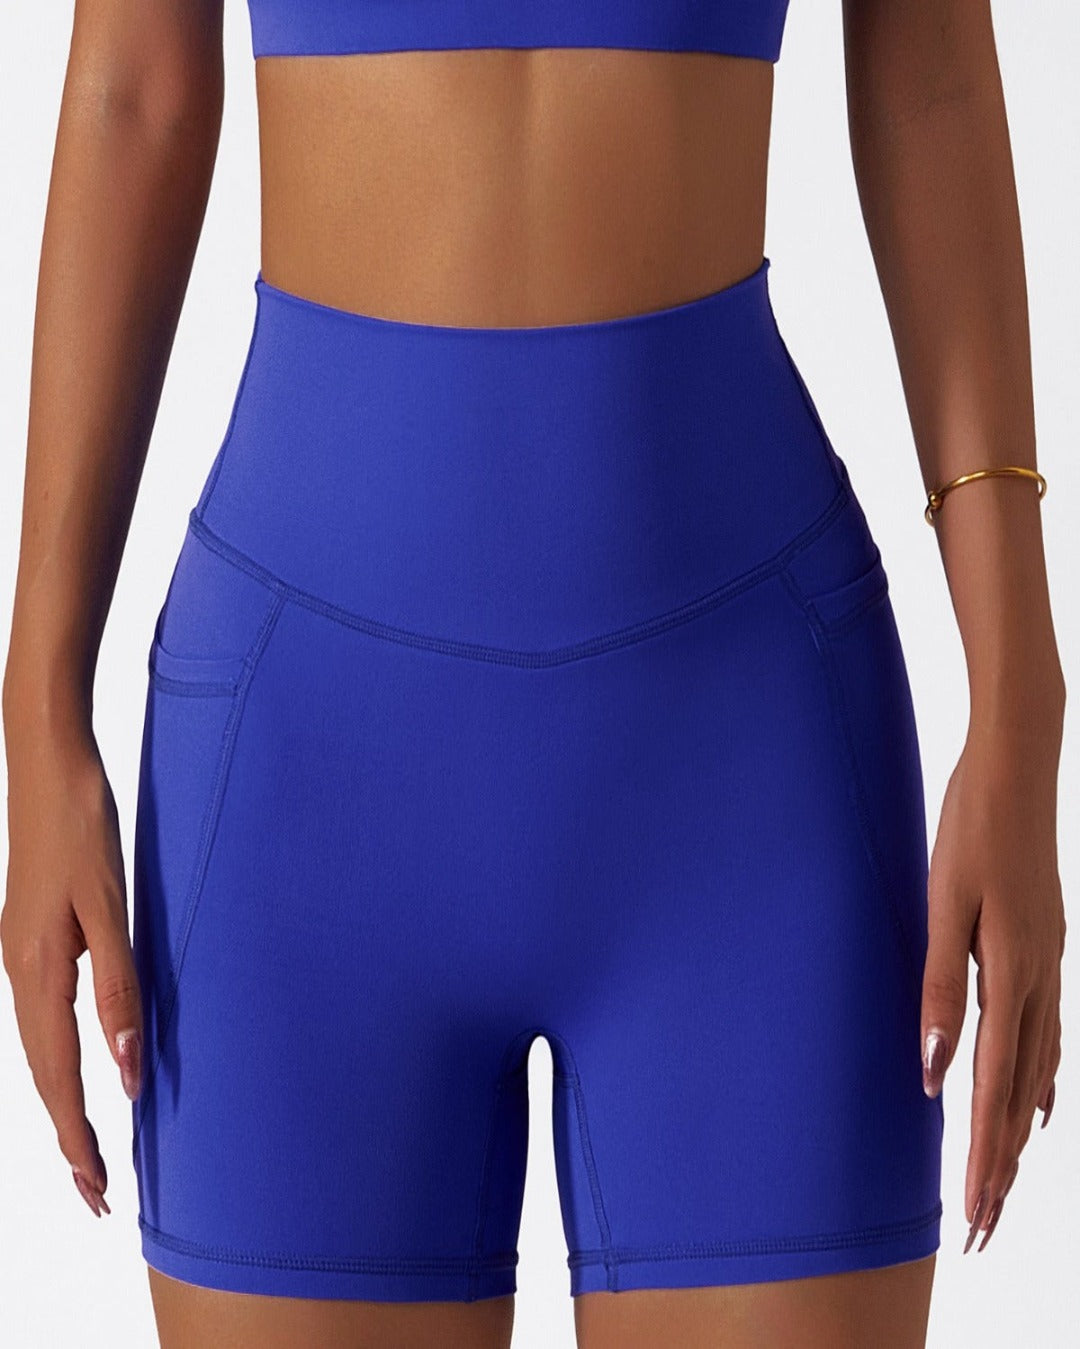 Klein Blue Buttery Smooth Mini Shorts